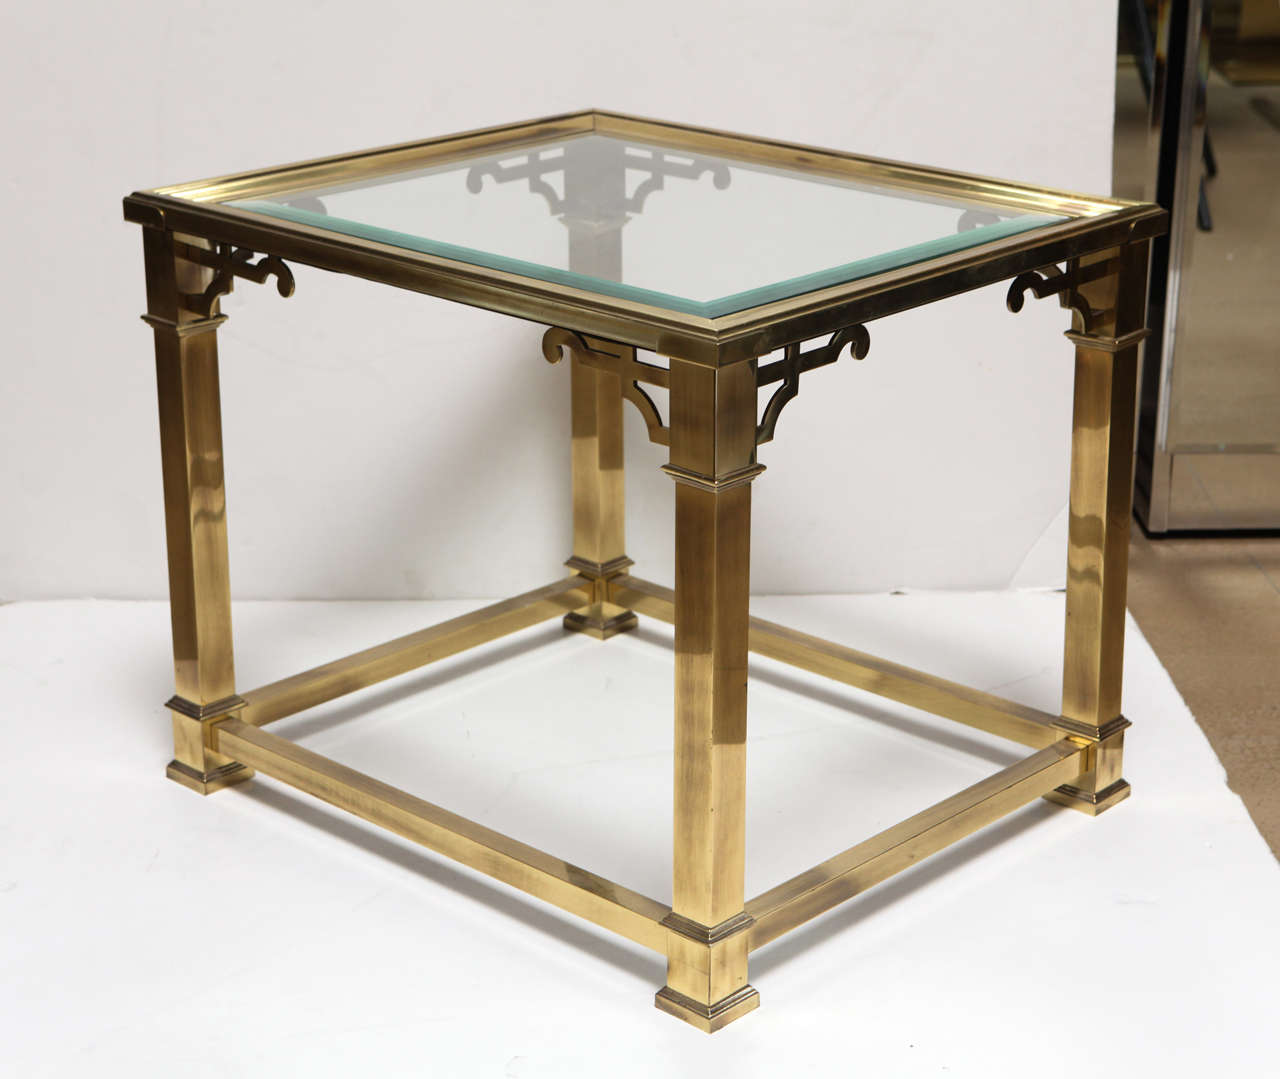 1960's Mastercraft side table in brass with inset glass top featuring Chinoiserie accents.